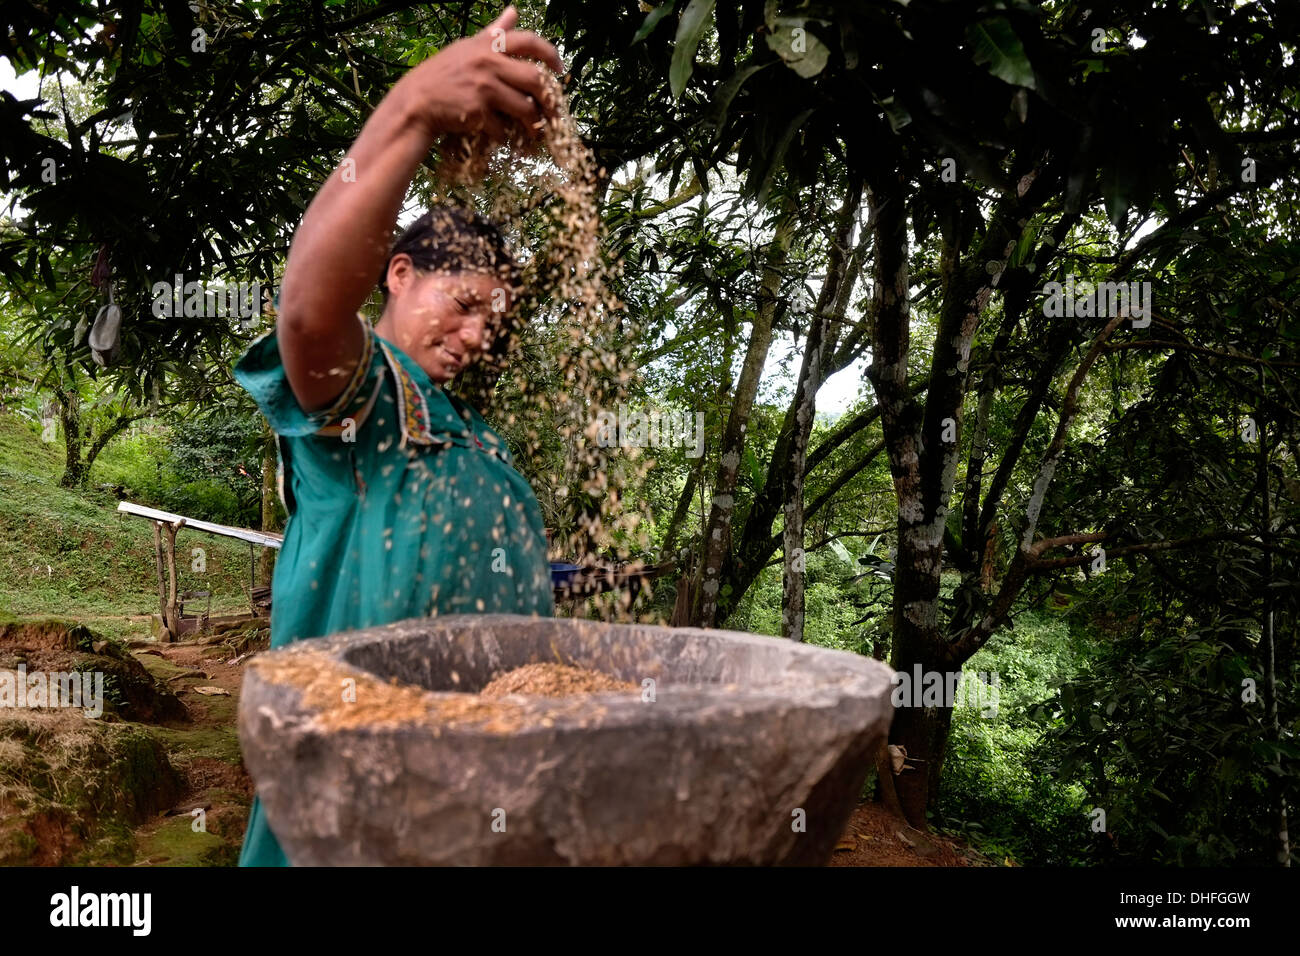 Indigenous woman of the Ngabe & Bugle native ethnic group sorts seeds in Comarca Quebrado region, Guabo reservation in Chiriqui province Republic of Panama Stock Photo